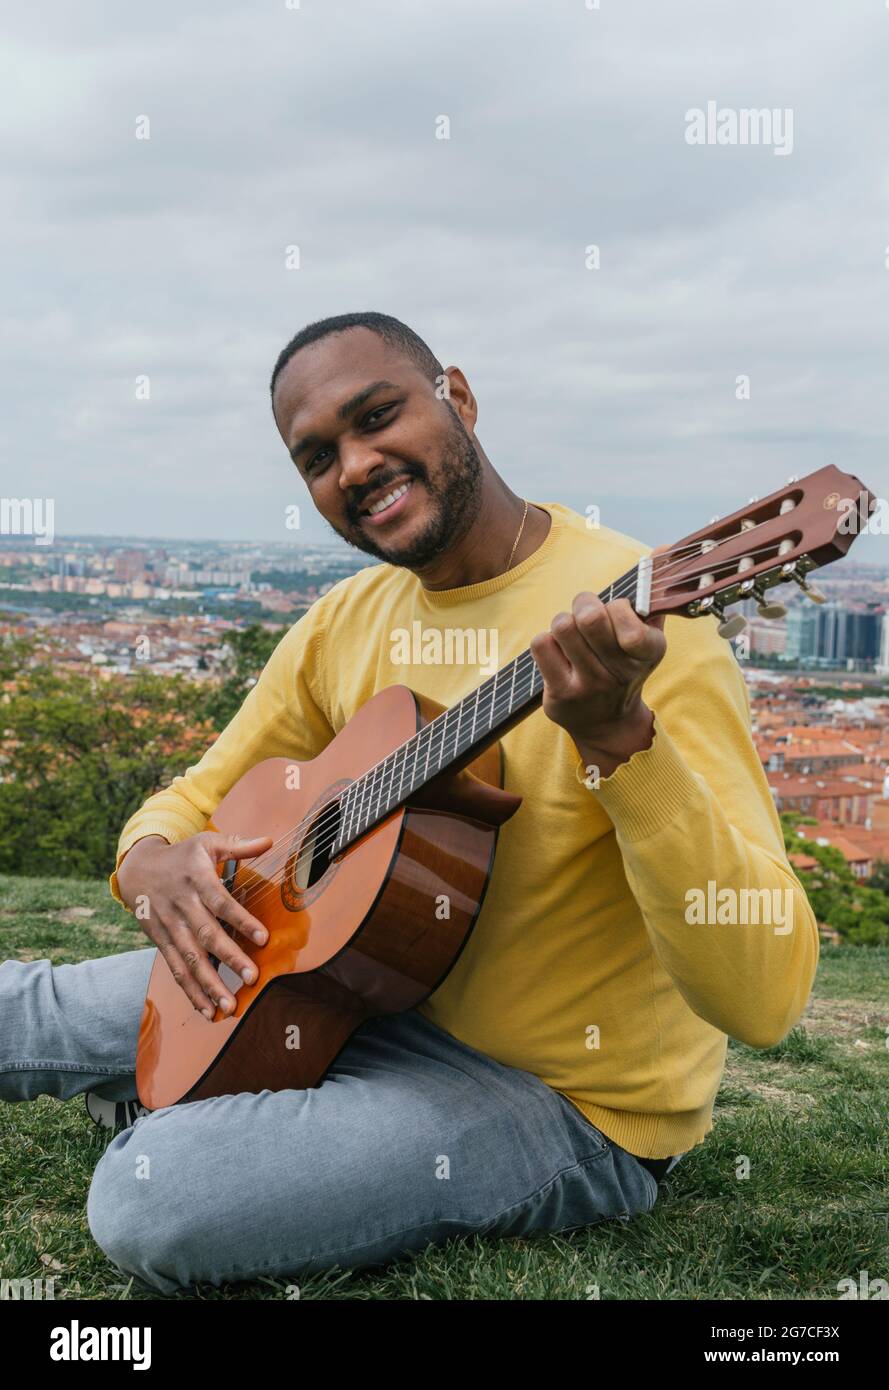 Black man playing guitar in an outdoor park Stock Photo